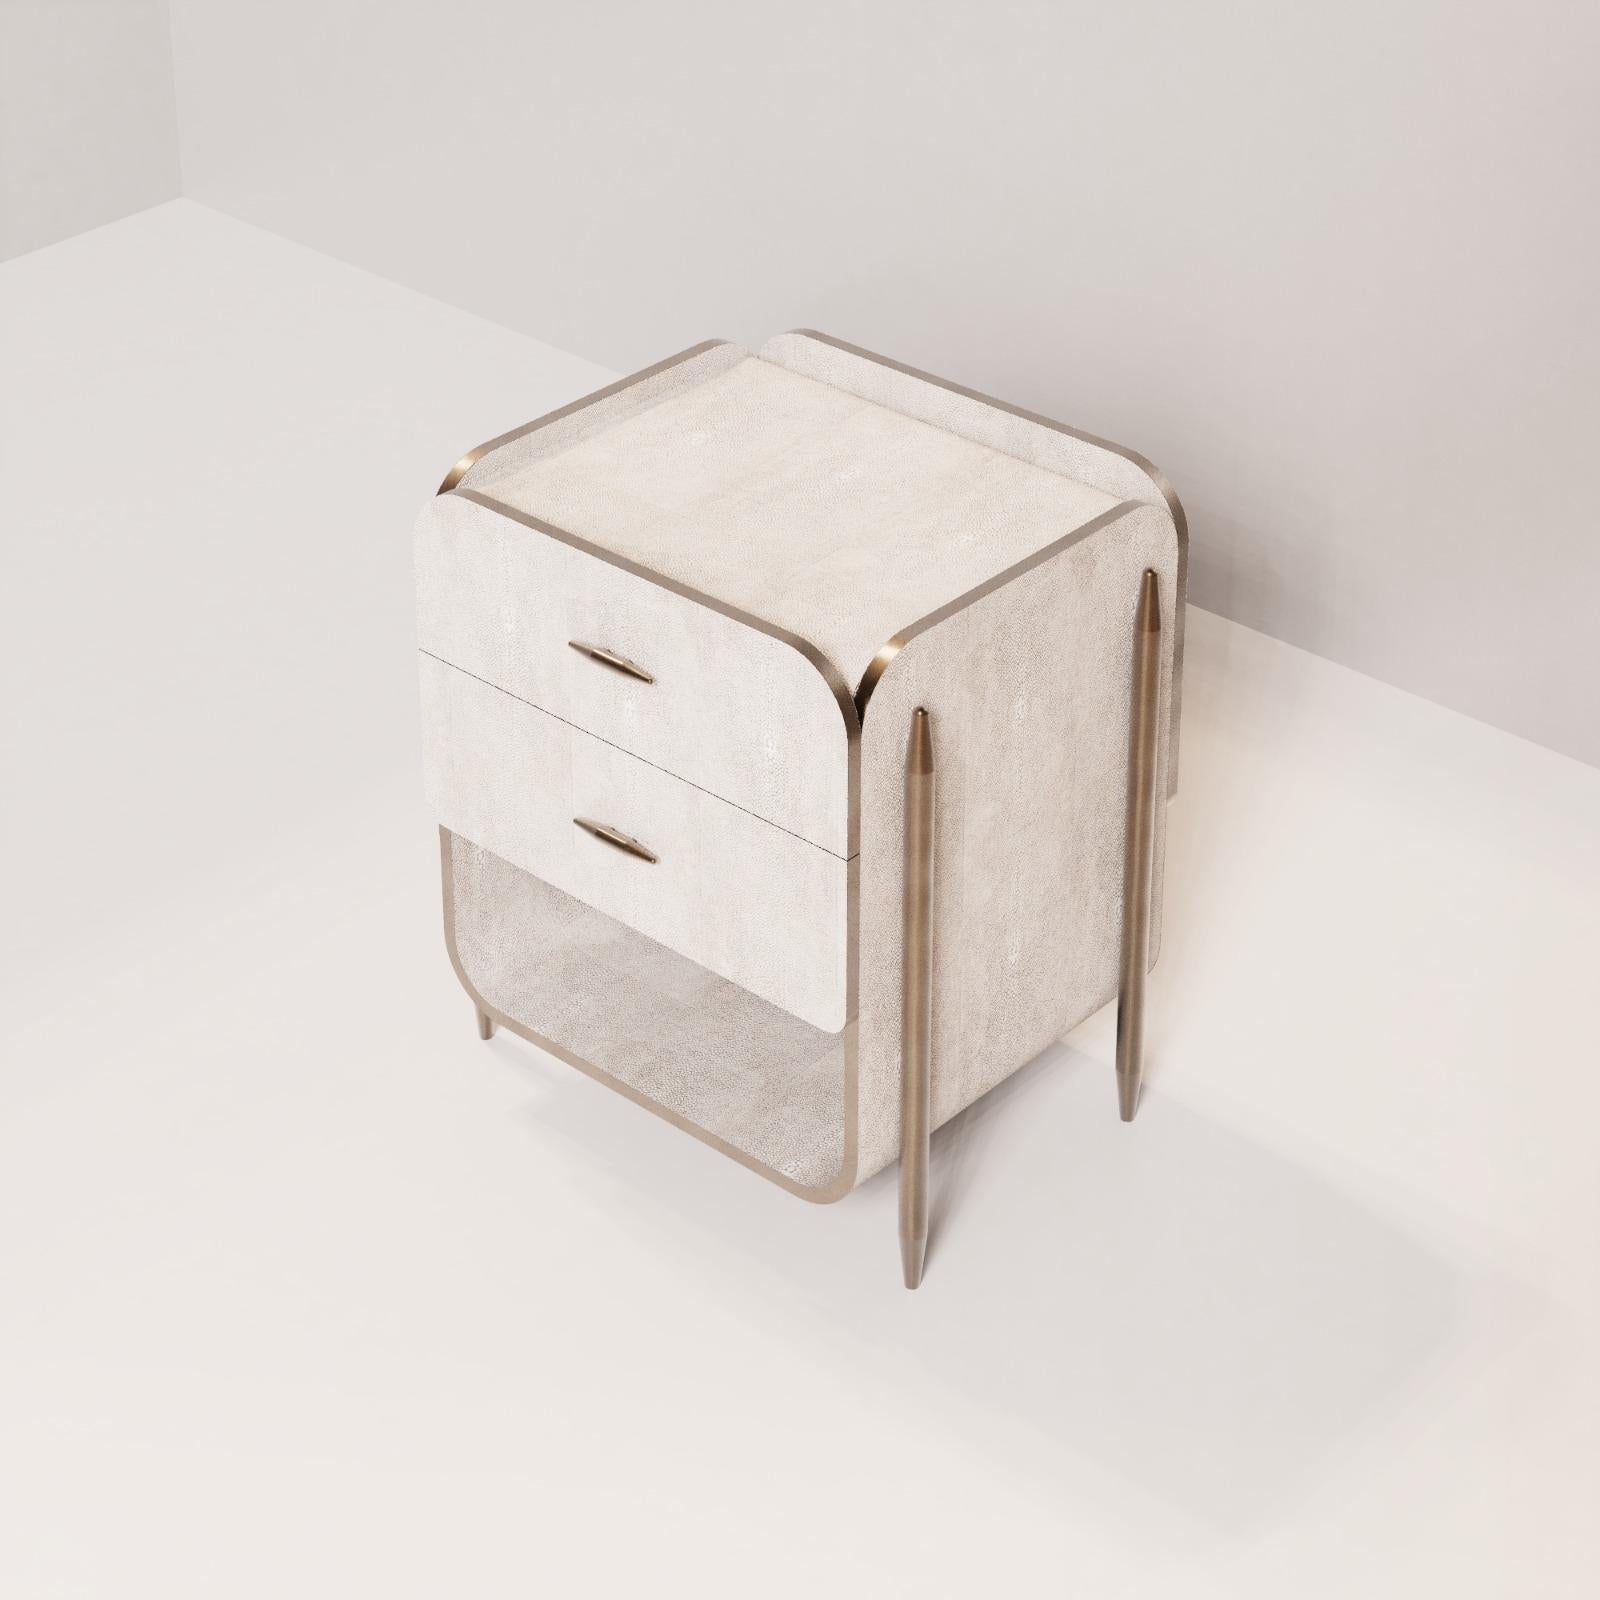 The Dandy Square Bedside Table by Kifu Paris is an elegant and a luxurious home accent, inlaid in cream shagreen with bronze-patina brass details. This piece includes 2 drawers total and an open shelf inlaid in shagreen. Available zith 2 drawers and